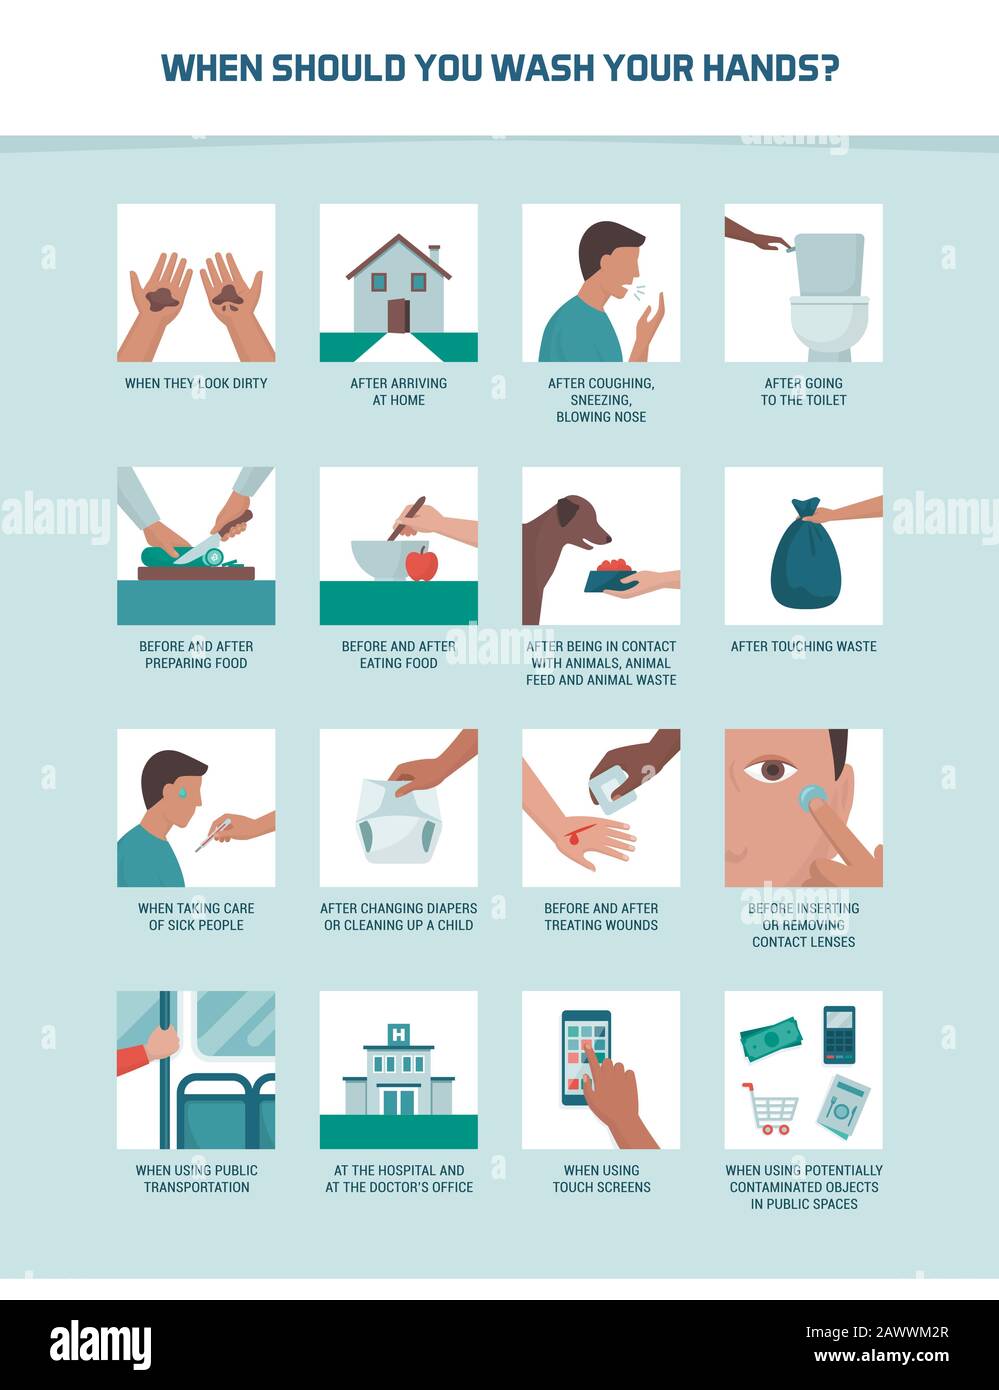 Personal hygiene, disease prevention and healthcare educational infographic: when should you wash your hands? Stock Vector